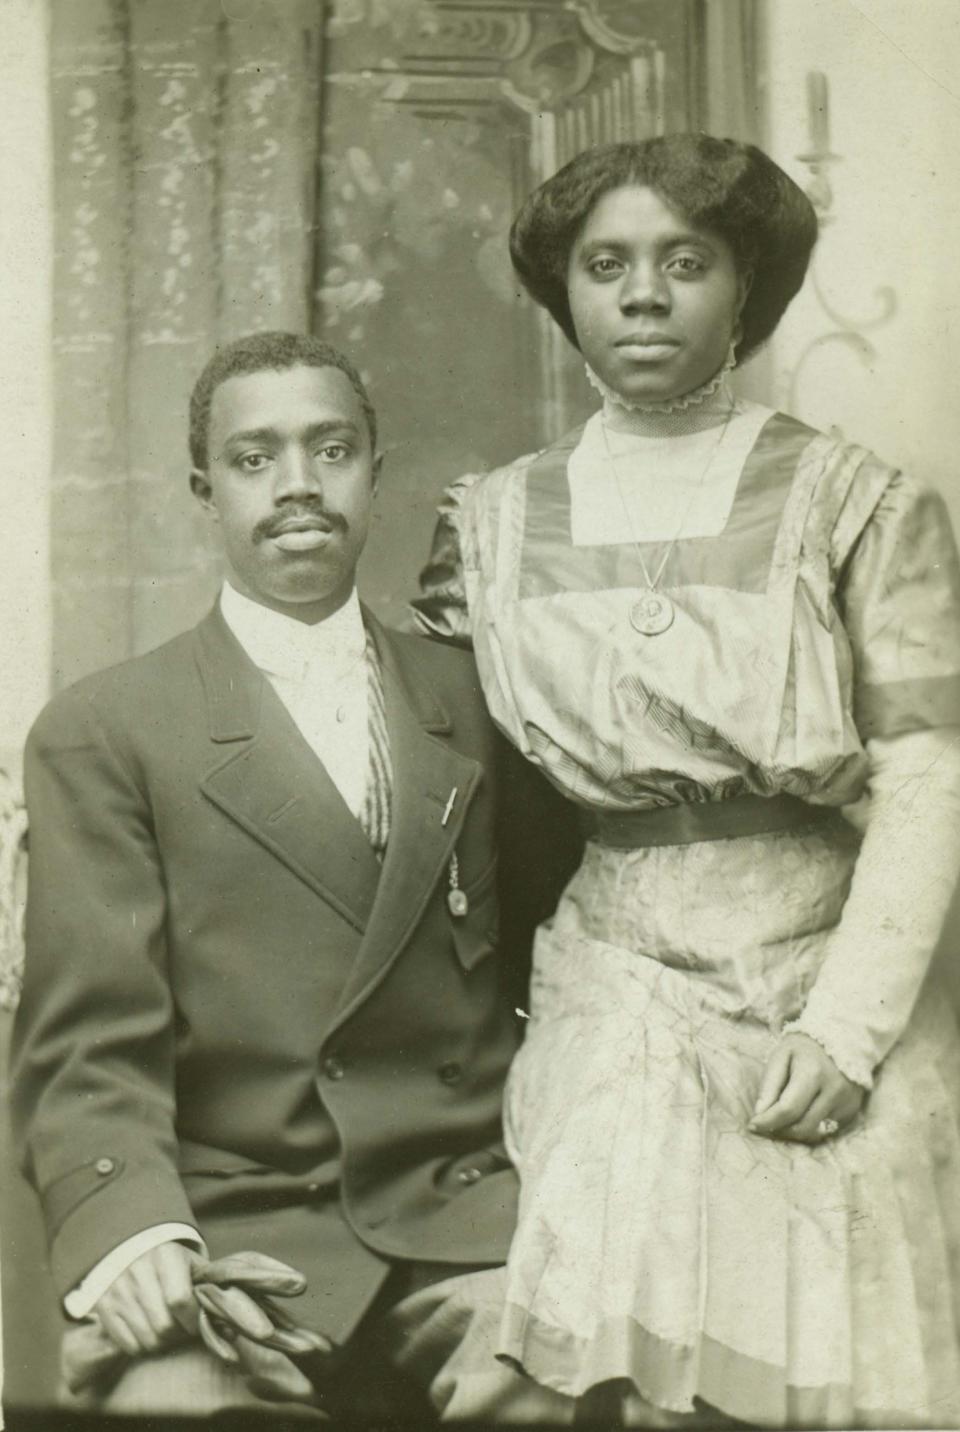 Baxter and Grace McDowell lived in Buxton and were married in 1911. They likely celebrated emancipation events in that town and nearby communities such as Oskaloosa, Albia and Mystic.